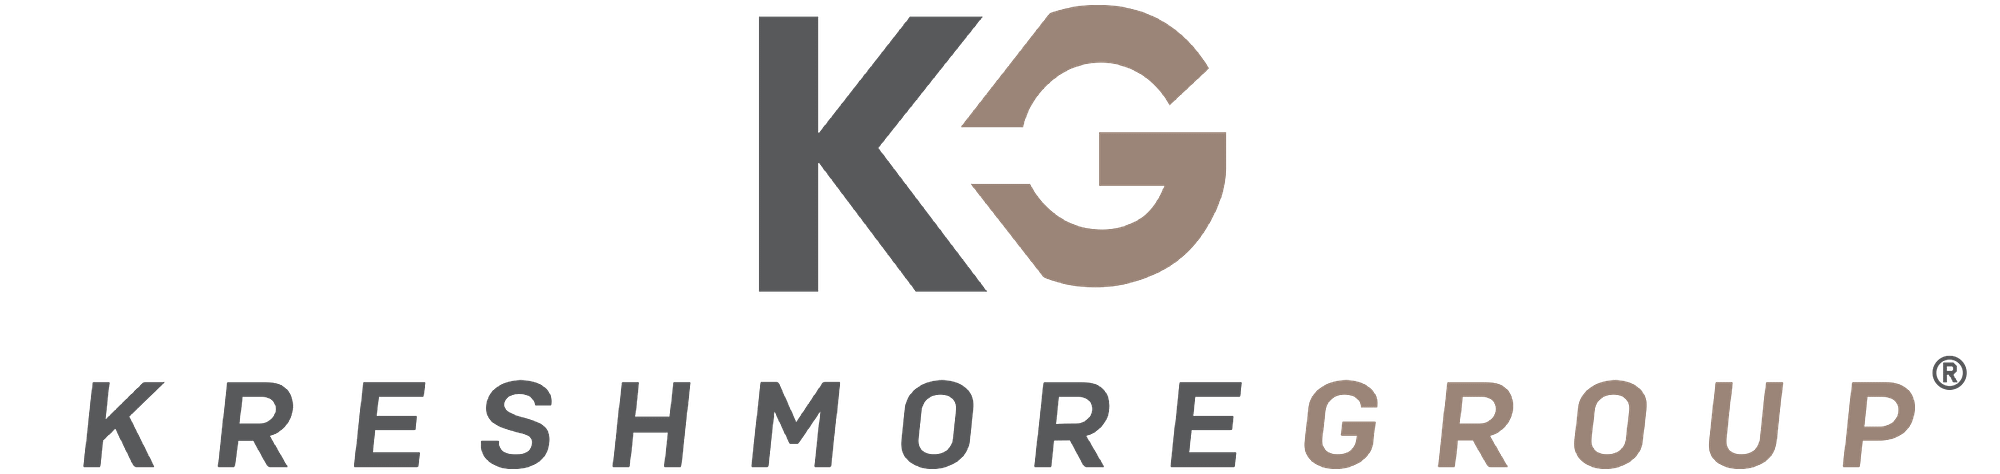 Kreshmore Group | Restructuring, Mergers, & Acquisitions Uncategorized 293